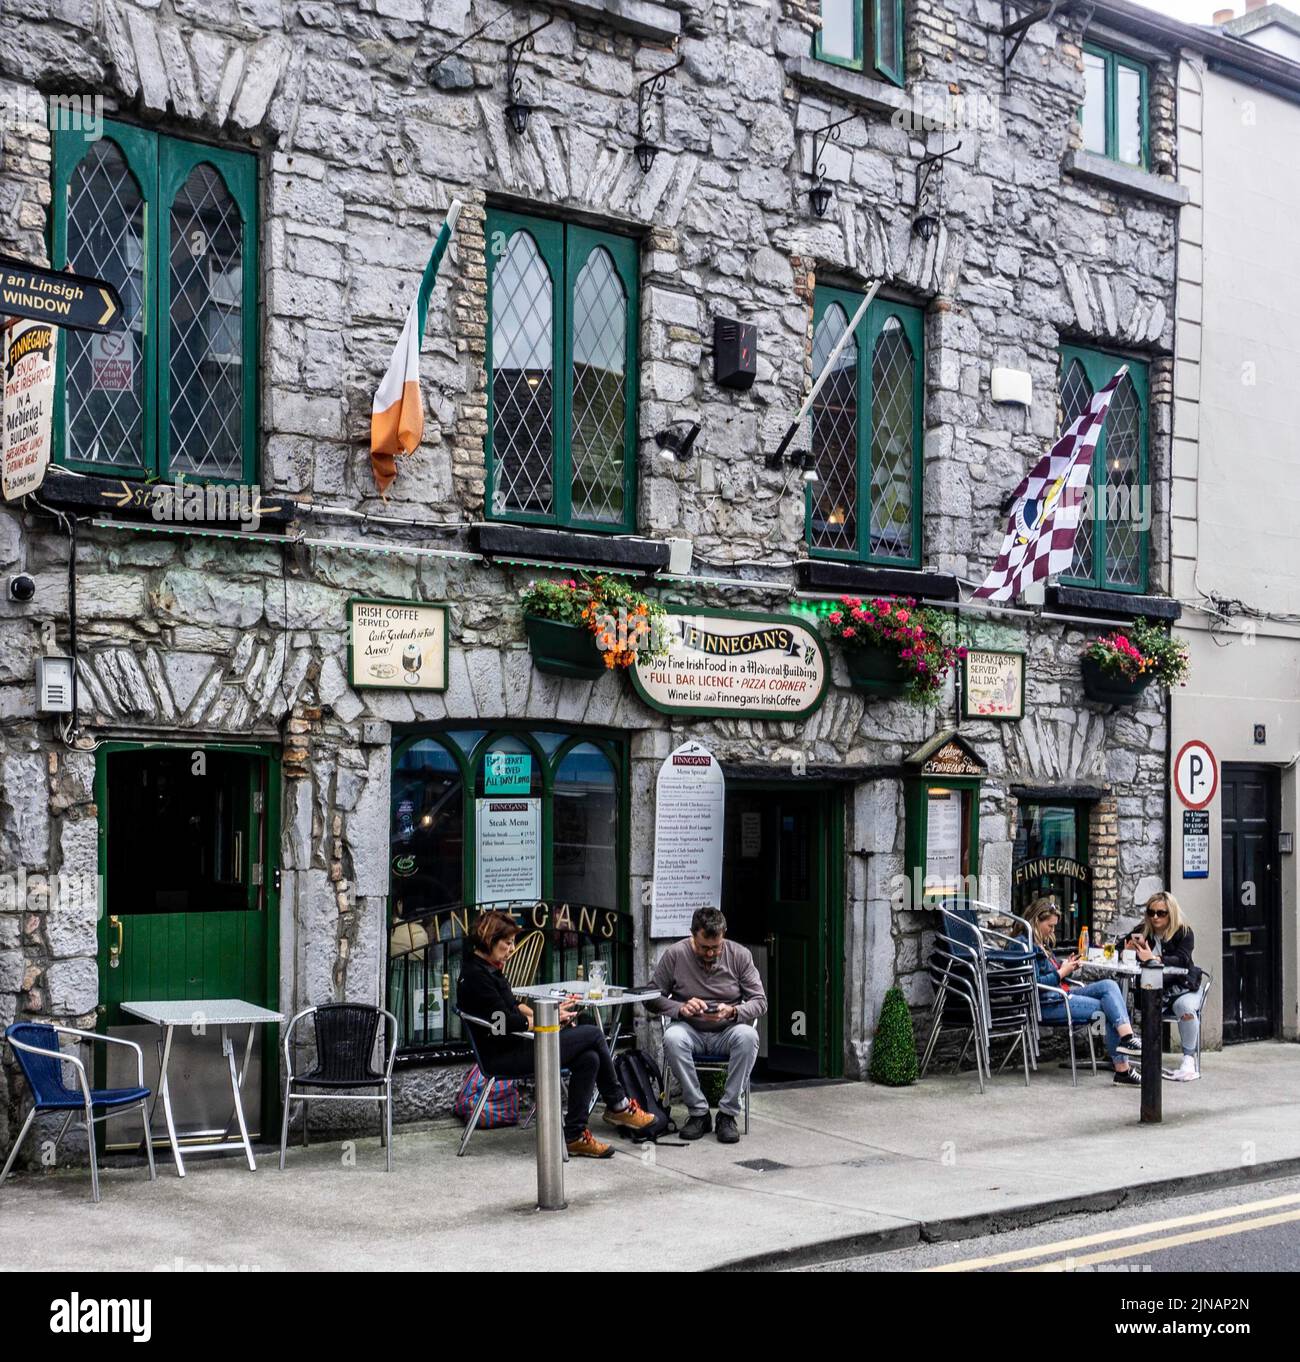 Dining out in Galway, Ireland at Finnegan’s Bar and Restaurant in Market Street. Stock Photo